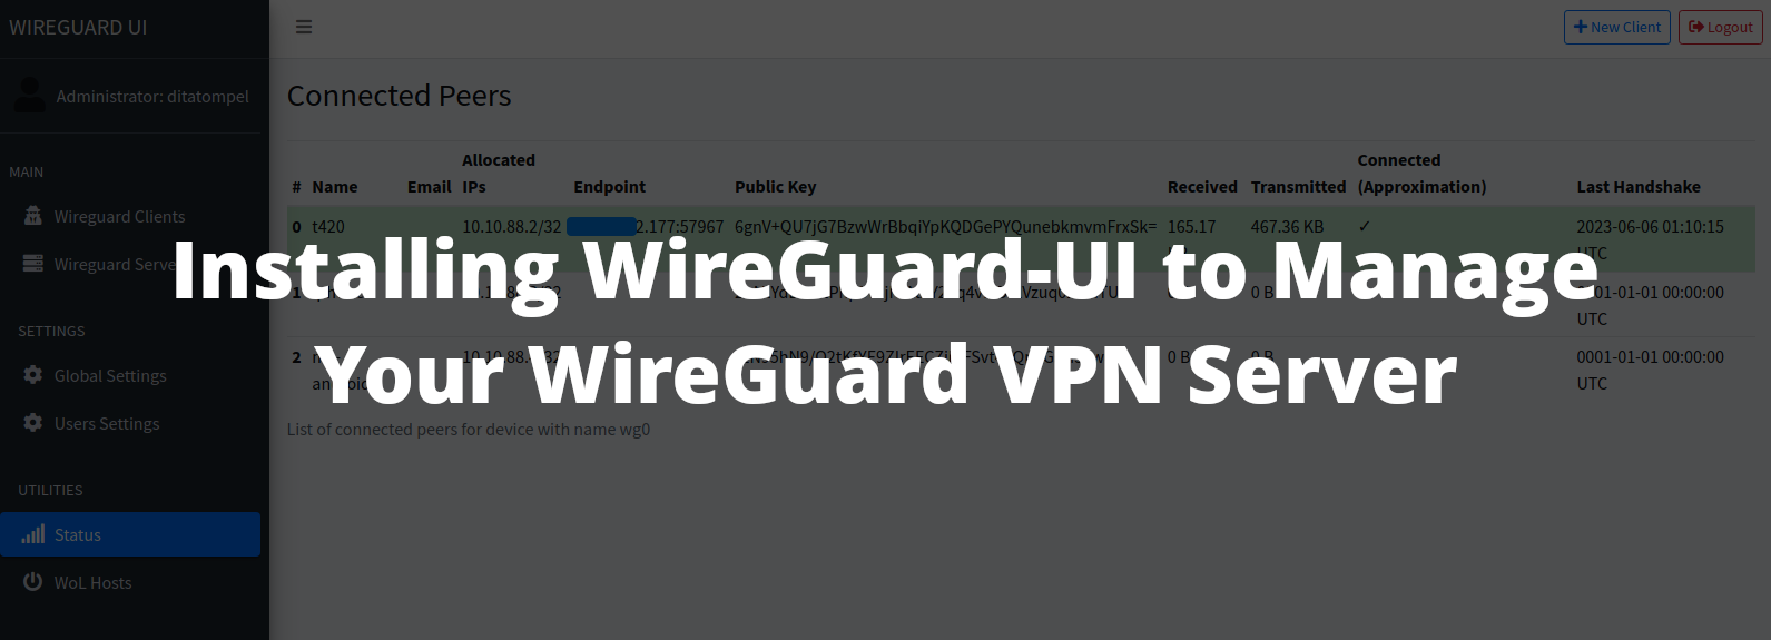 Installing WireGuard-UI to Manage Your WireGuard VPN Server